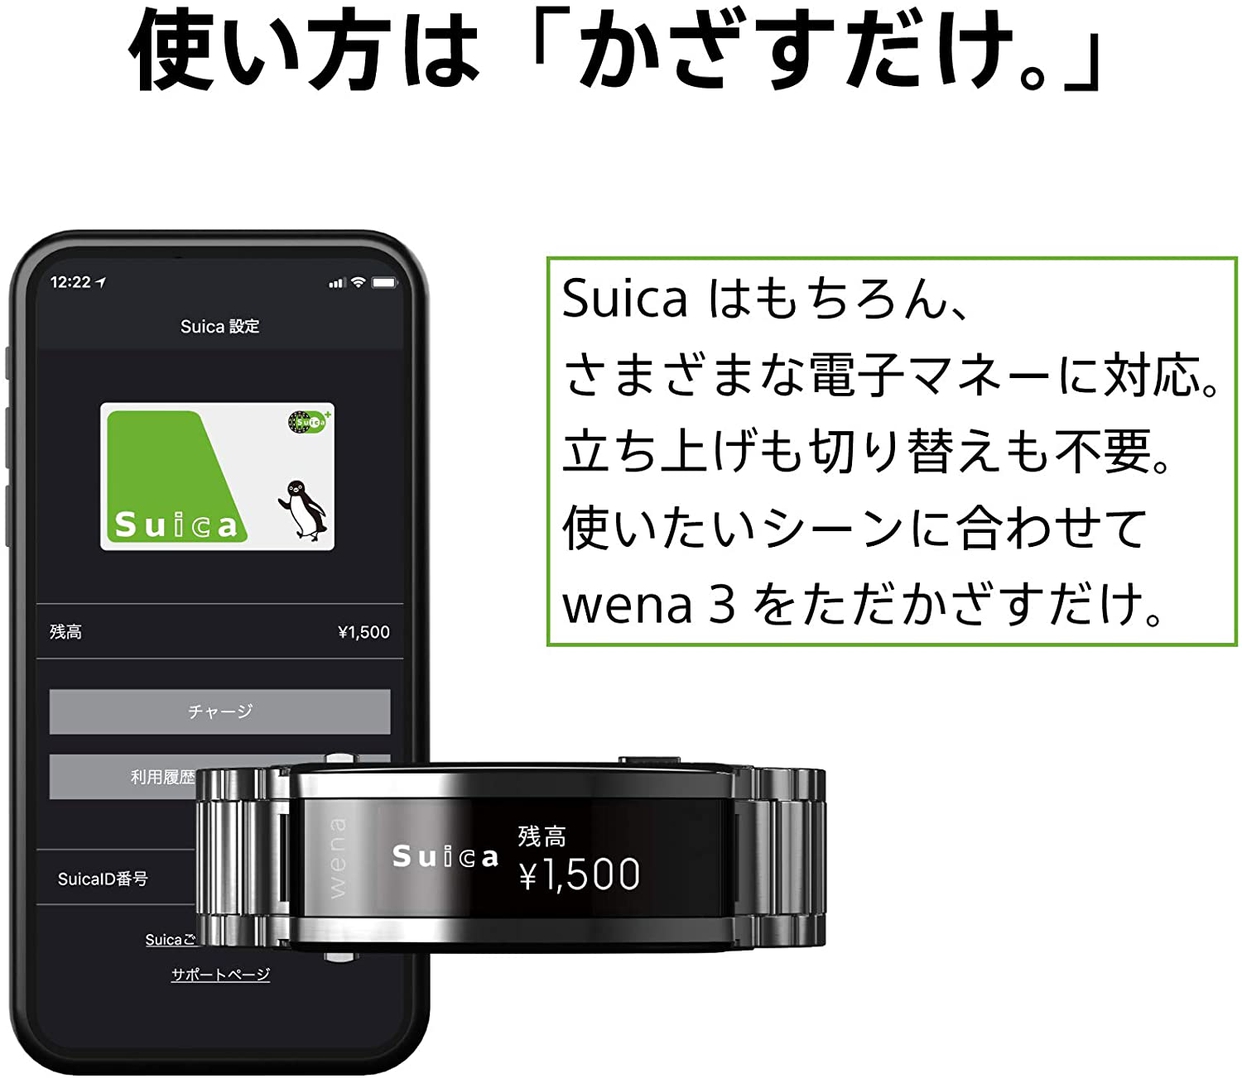 SONY(ソニー) wena 3 metalの商品画像サムネ5 